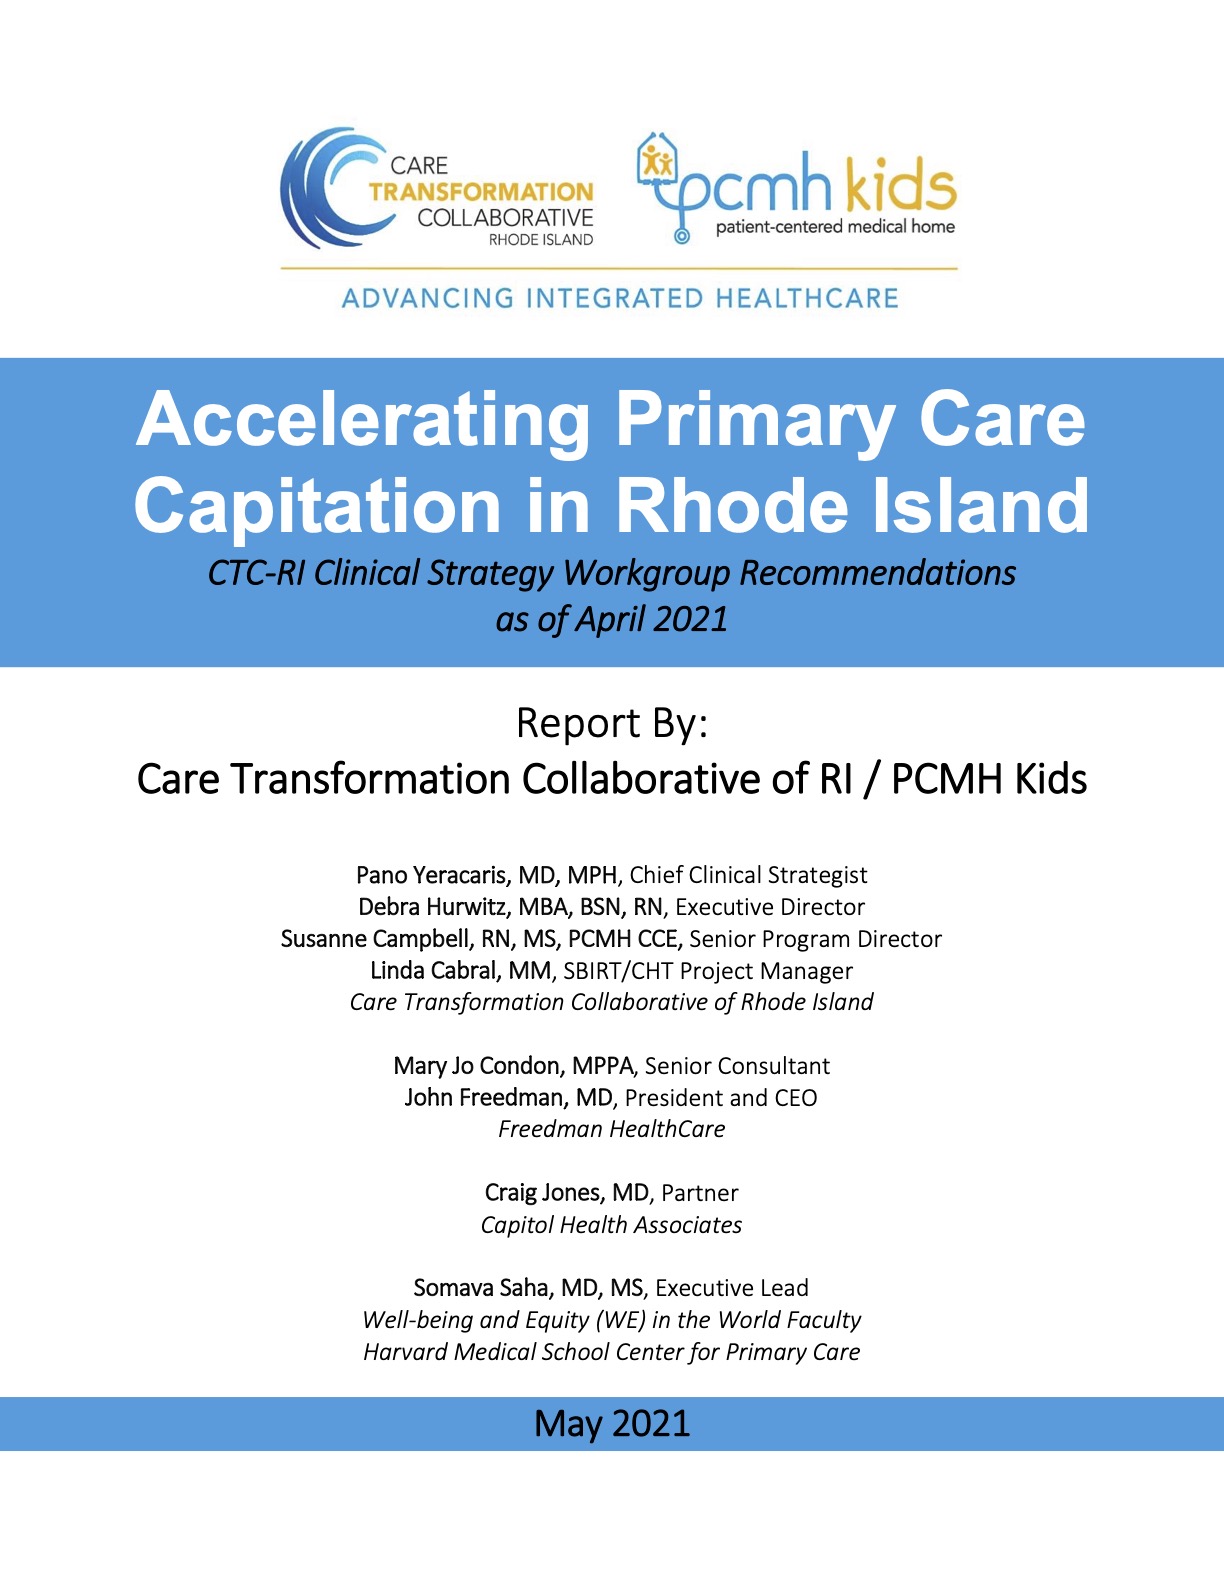  Accelerating Primary Care Capitation in Rhode Island